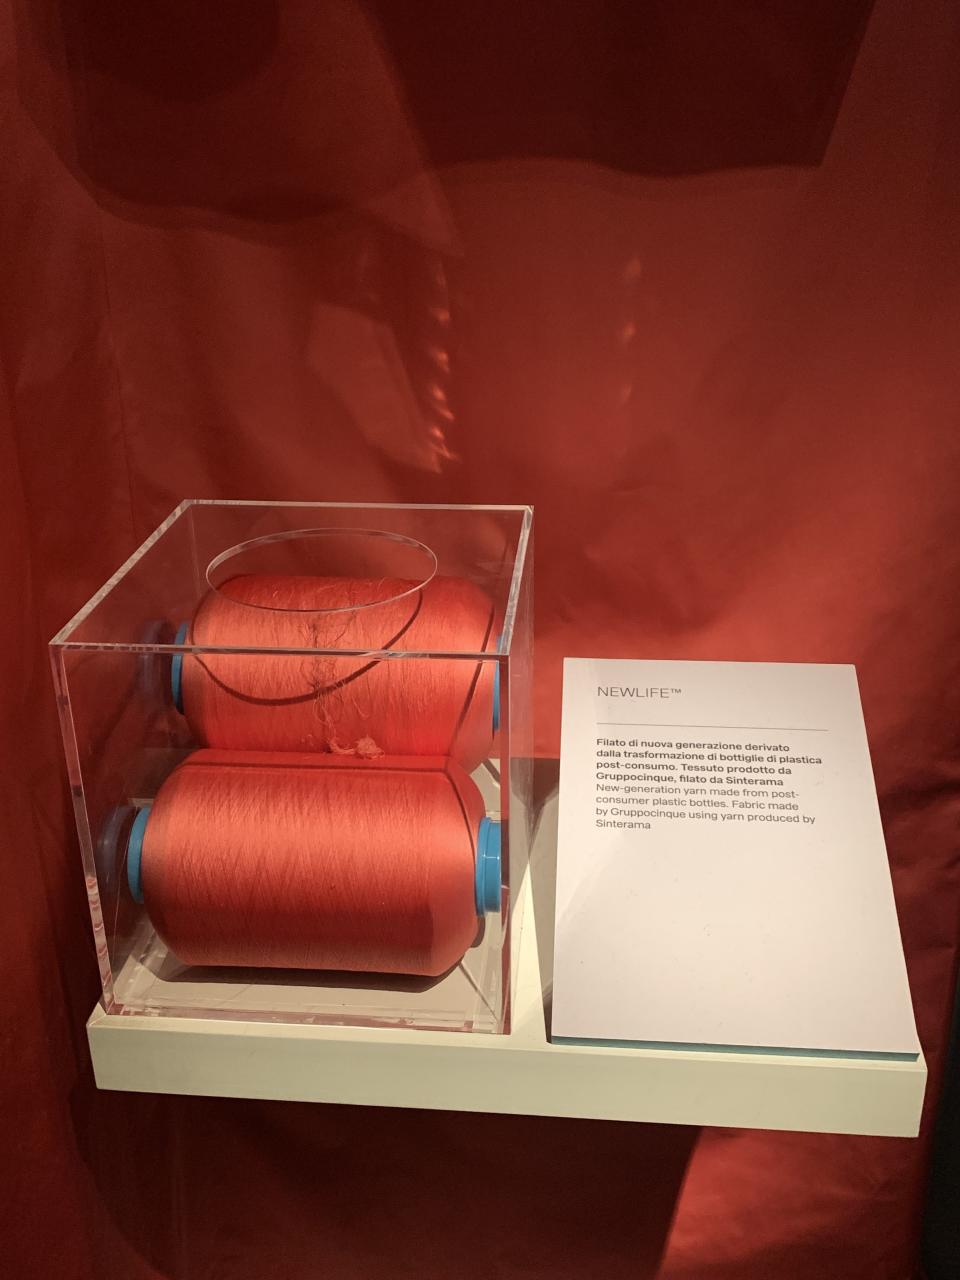 <h1 class="title">The newest exhibit at the Museo Salvatore Ferragamo focuses on sustainability. Here we have yarn made from recycled plastic bottles.</h1><cite class="credit">Photo: Justin Fernandez</cite>